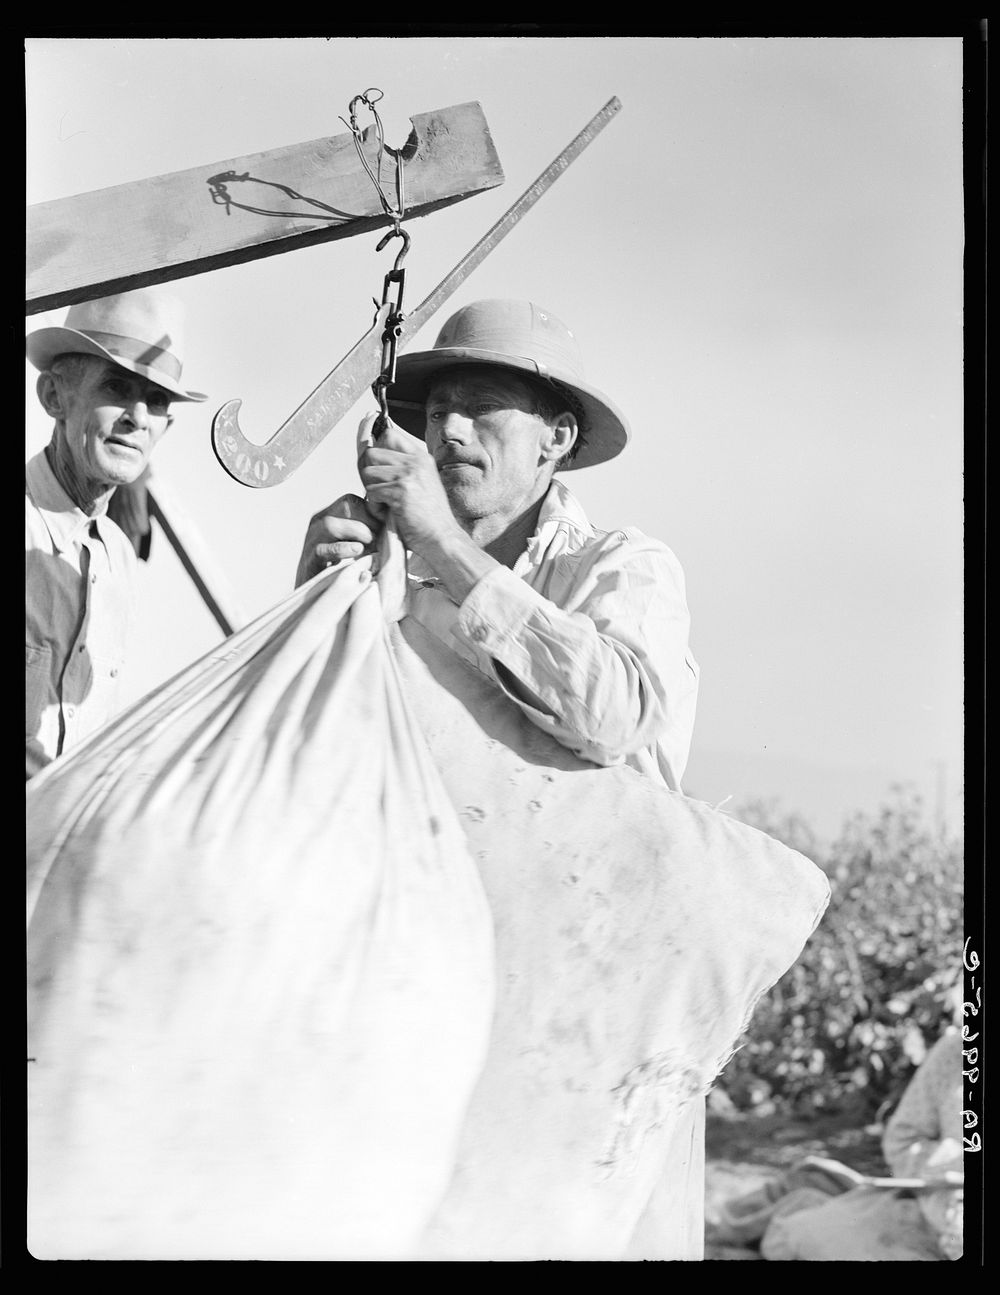 Weighing in cotton. Southern San Joaquin Valley, California. Sourced from the Library of Congress.